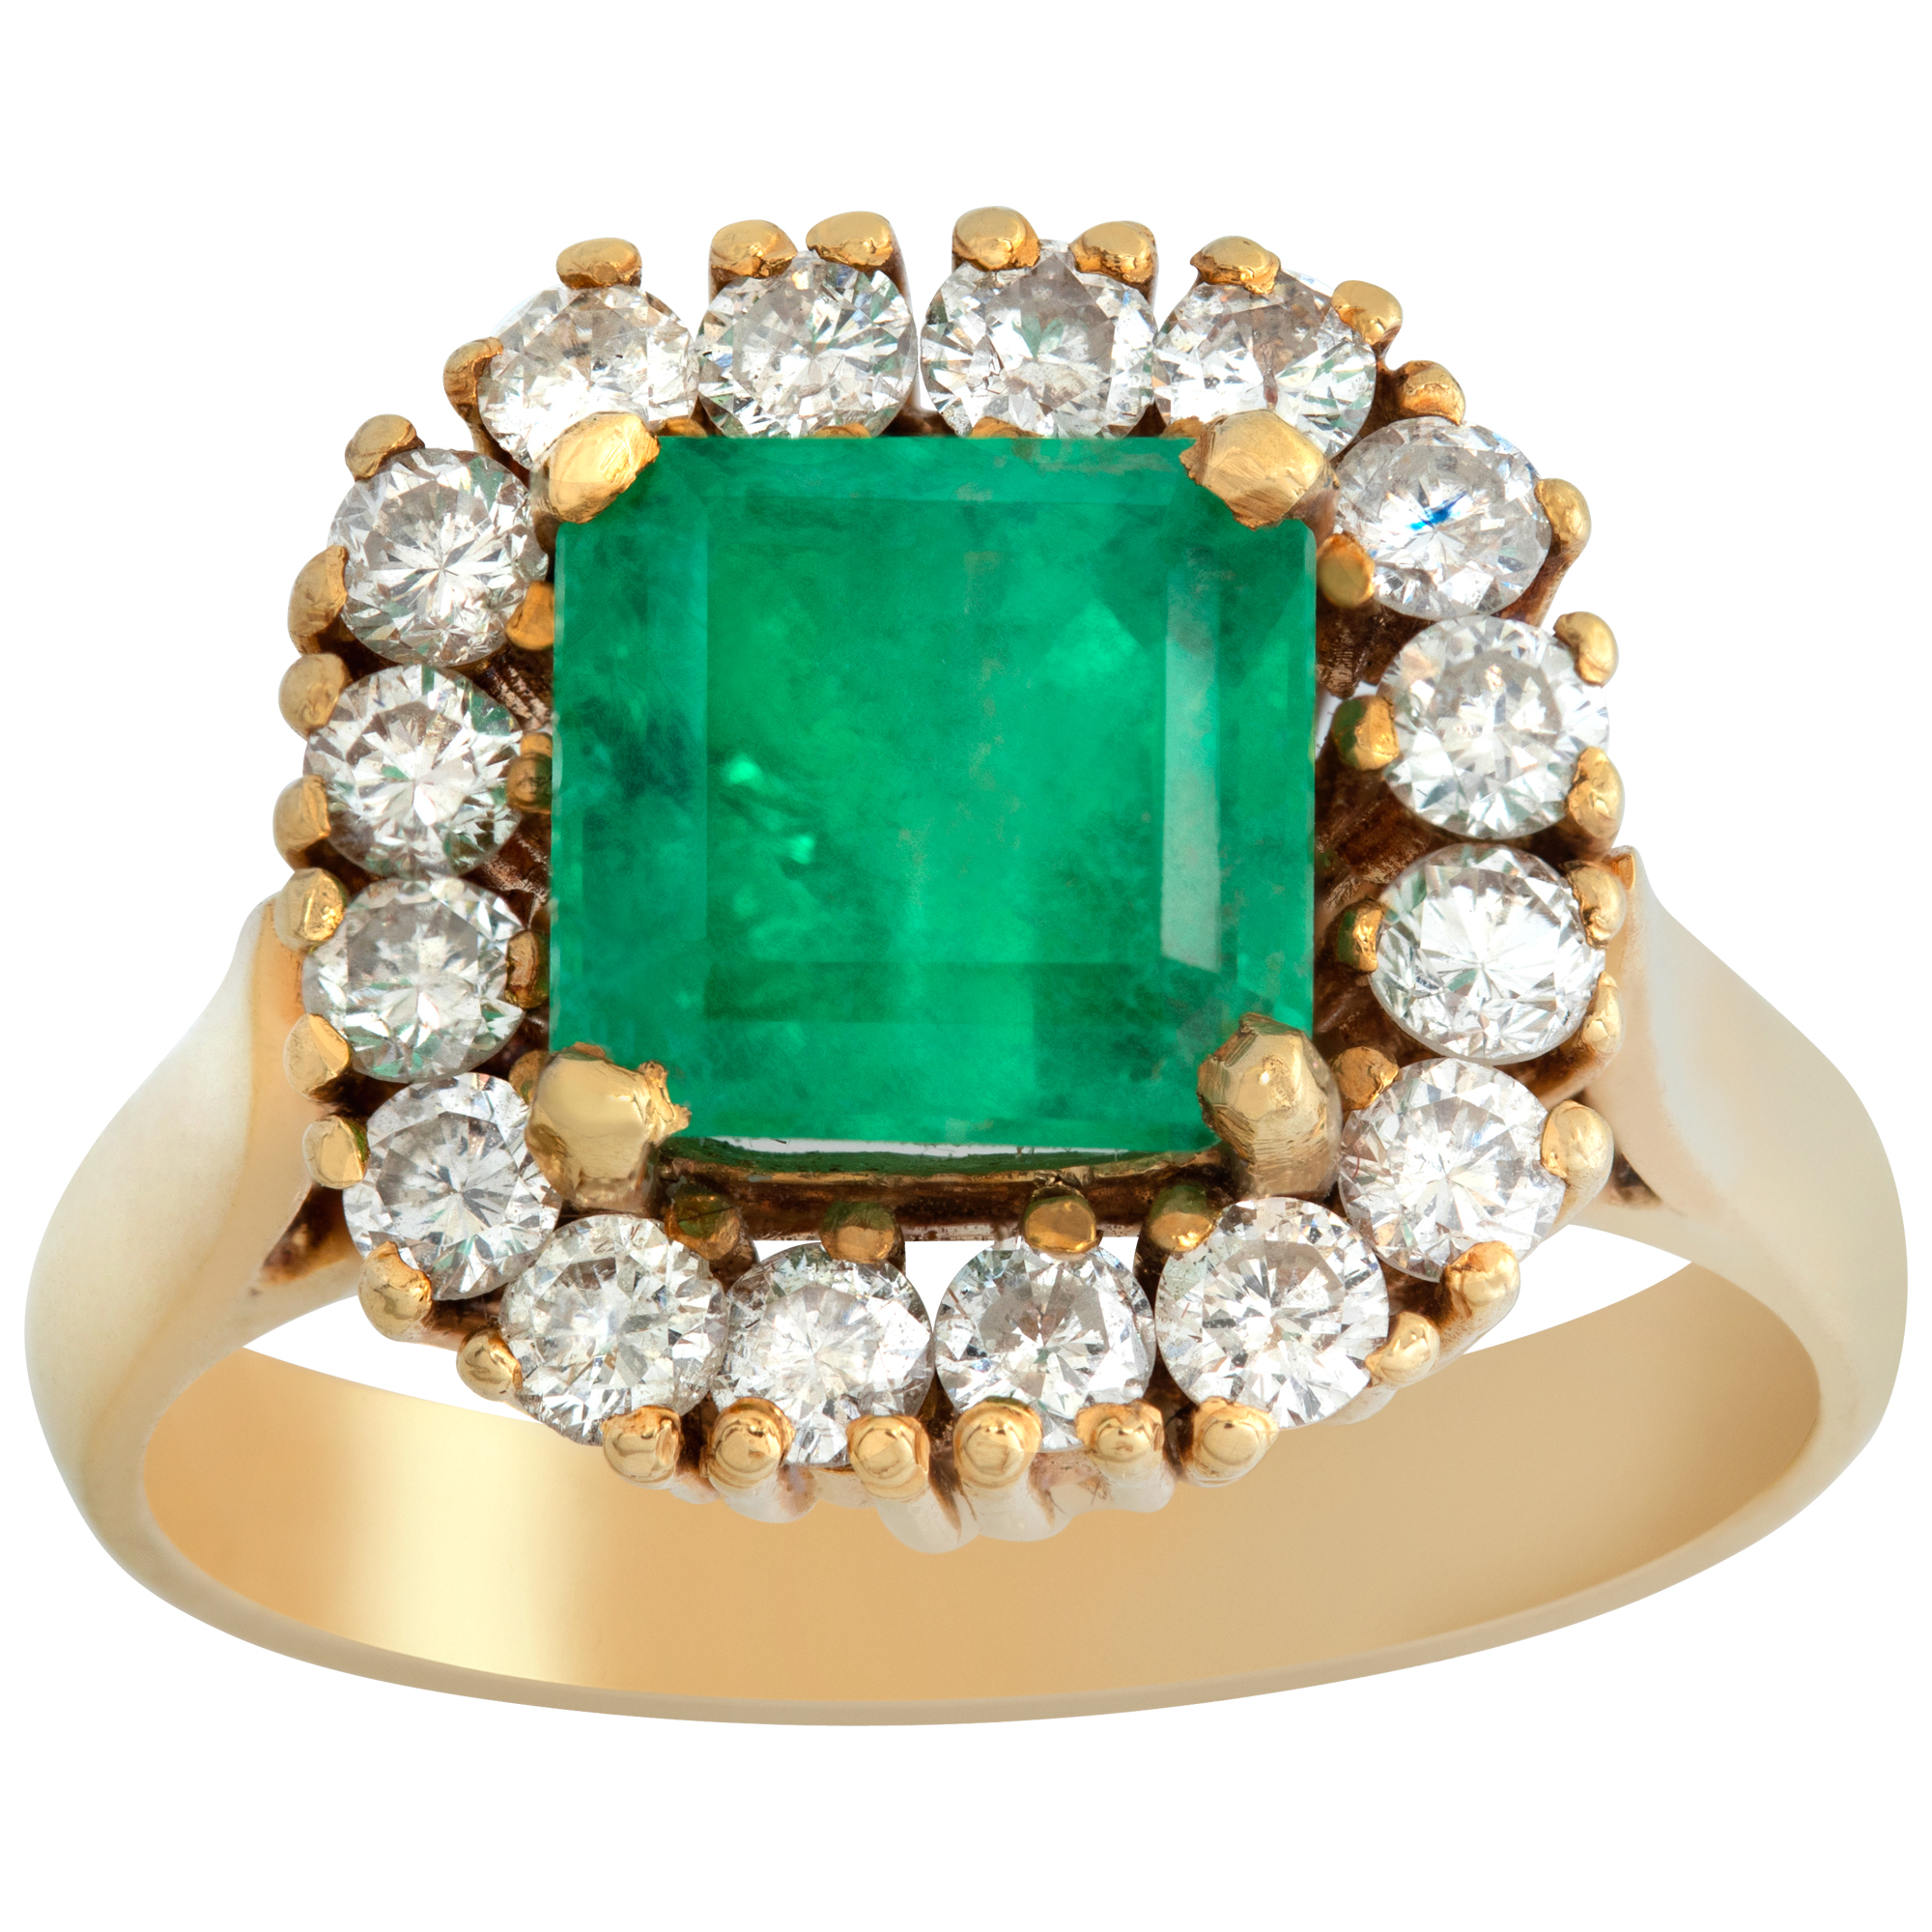 Emerald and diamond ring with an over 2 carat center Emerald surrounded by 0.80 carats in diamonds image 1